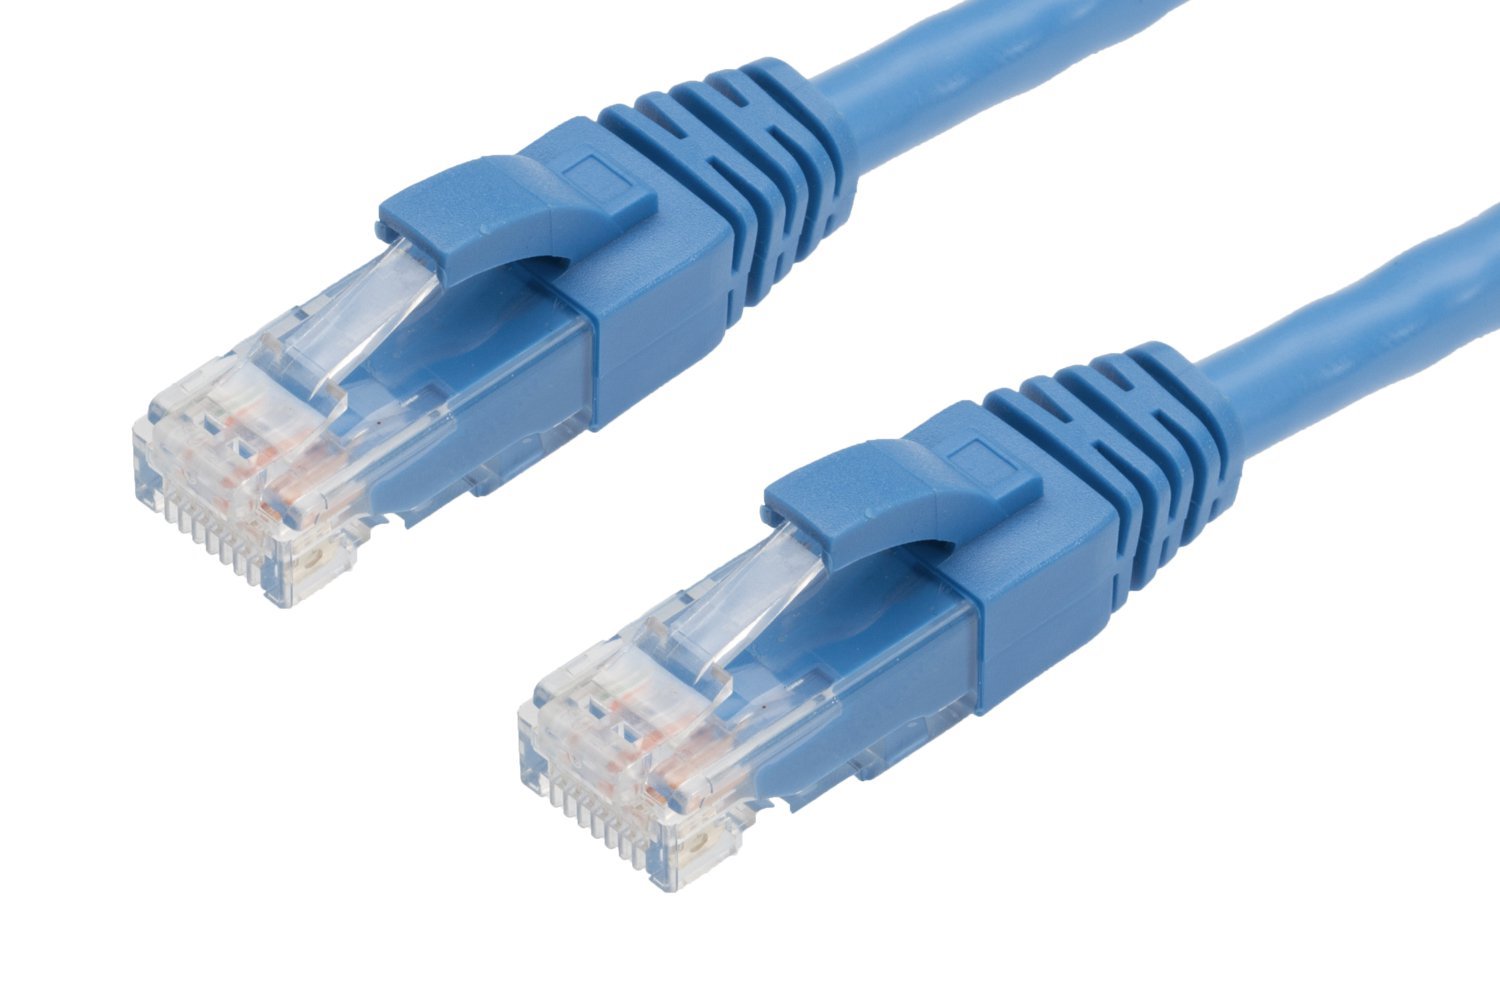 4Cabling 1.5M Cat 5E Ethernet Network Cable: Blue